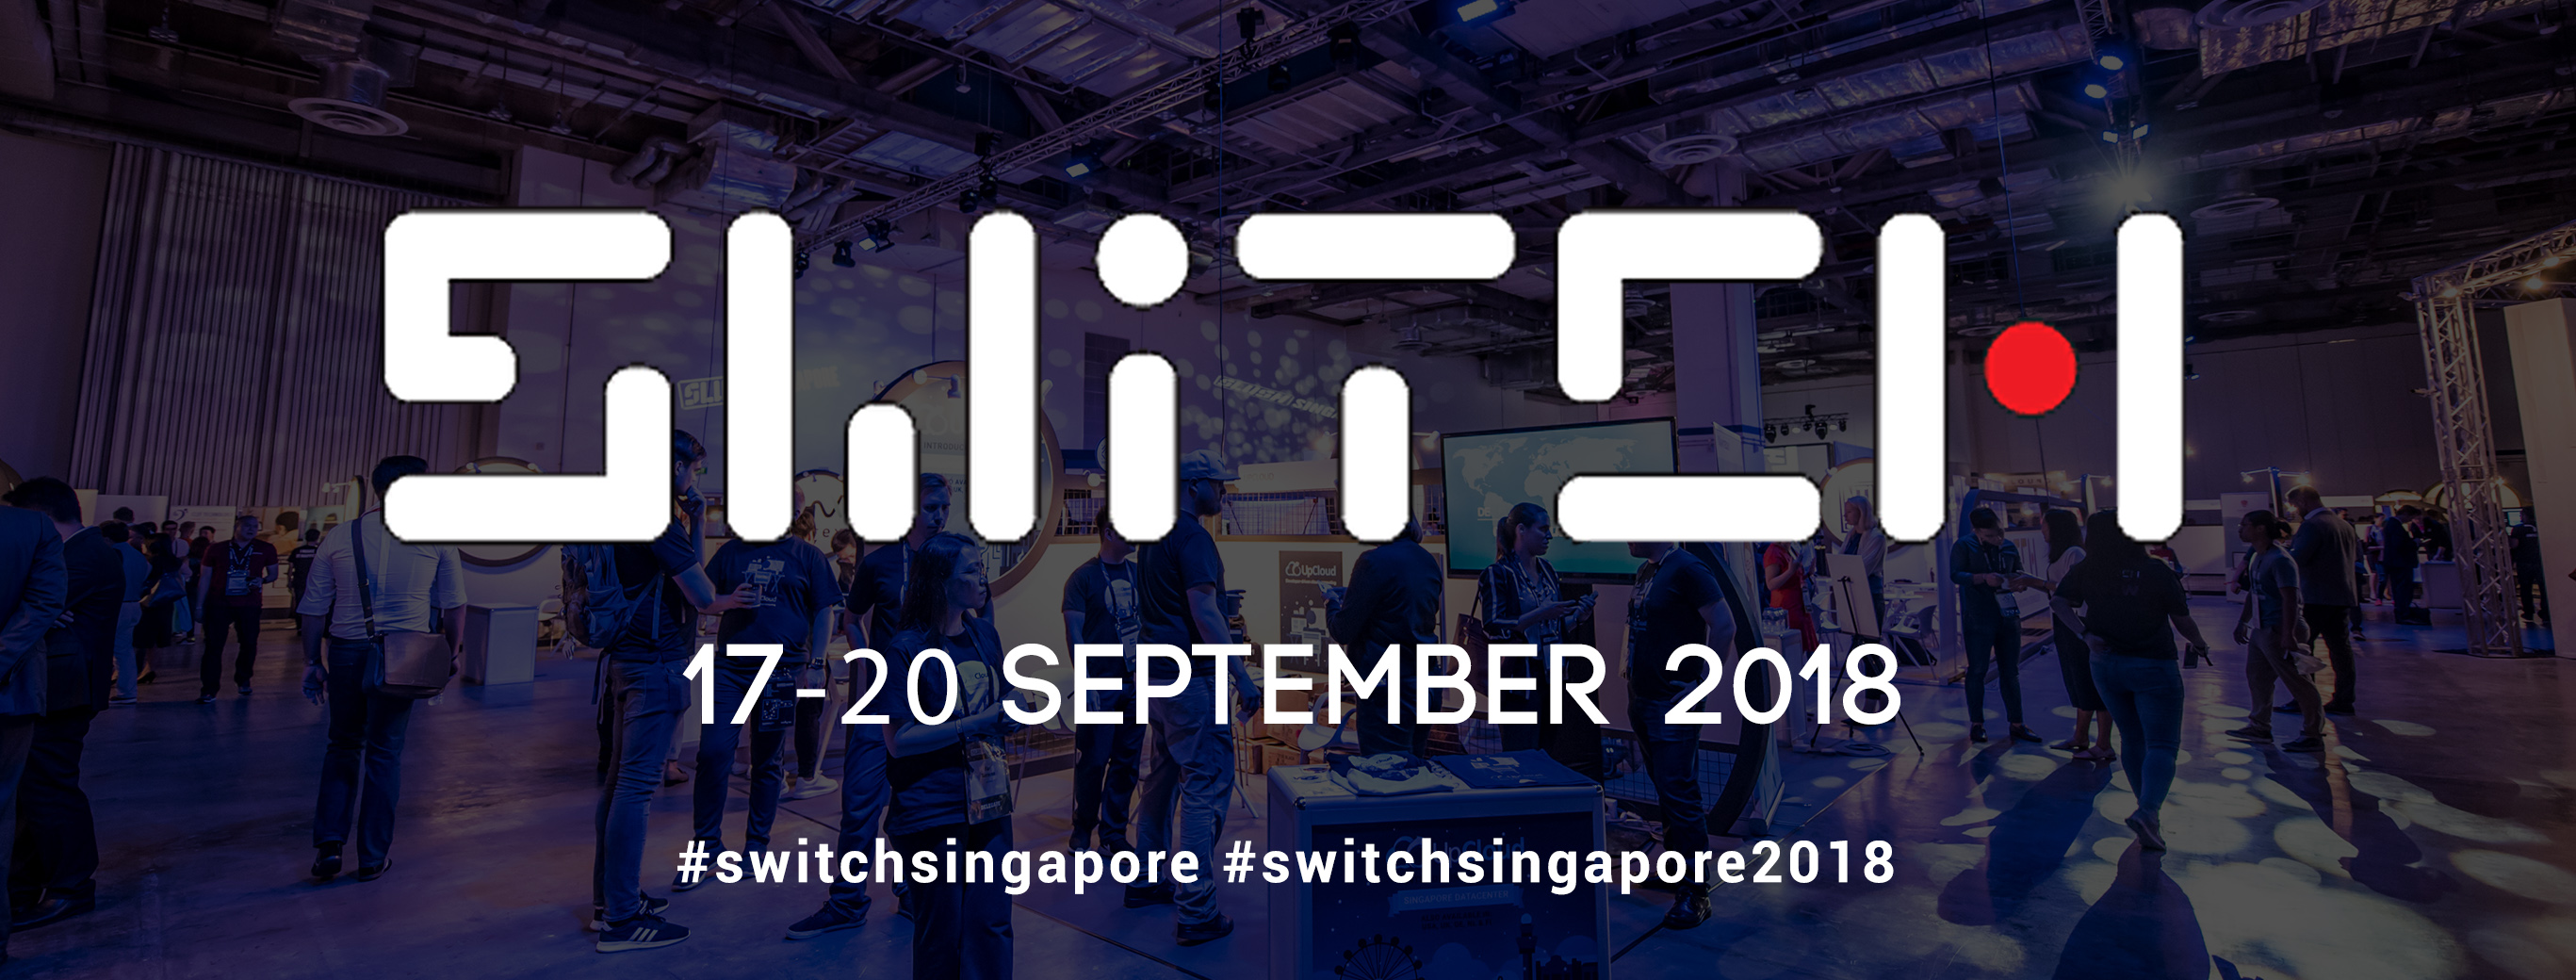 Come and get inspired by Singapore‘s SWITCH conference